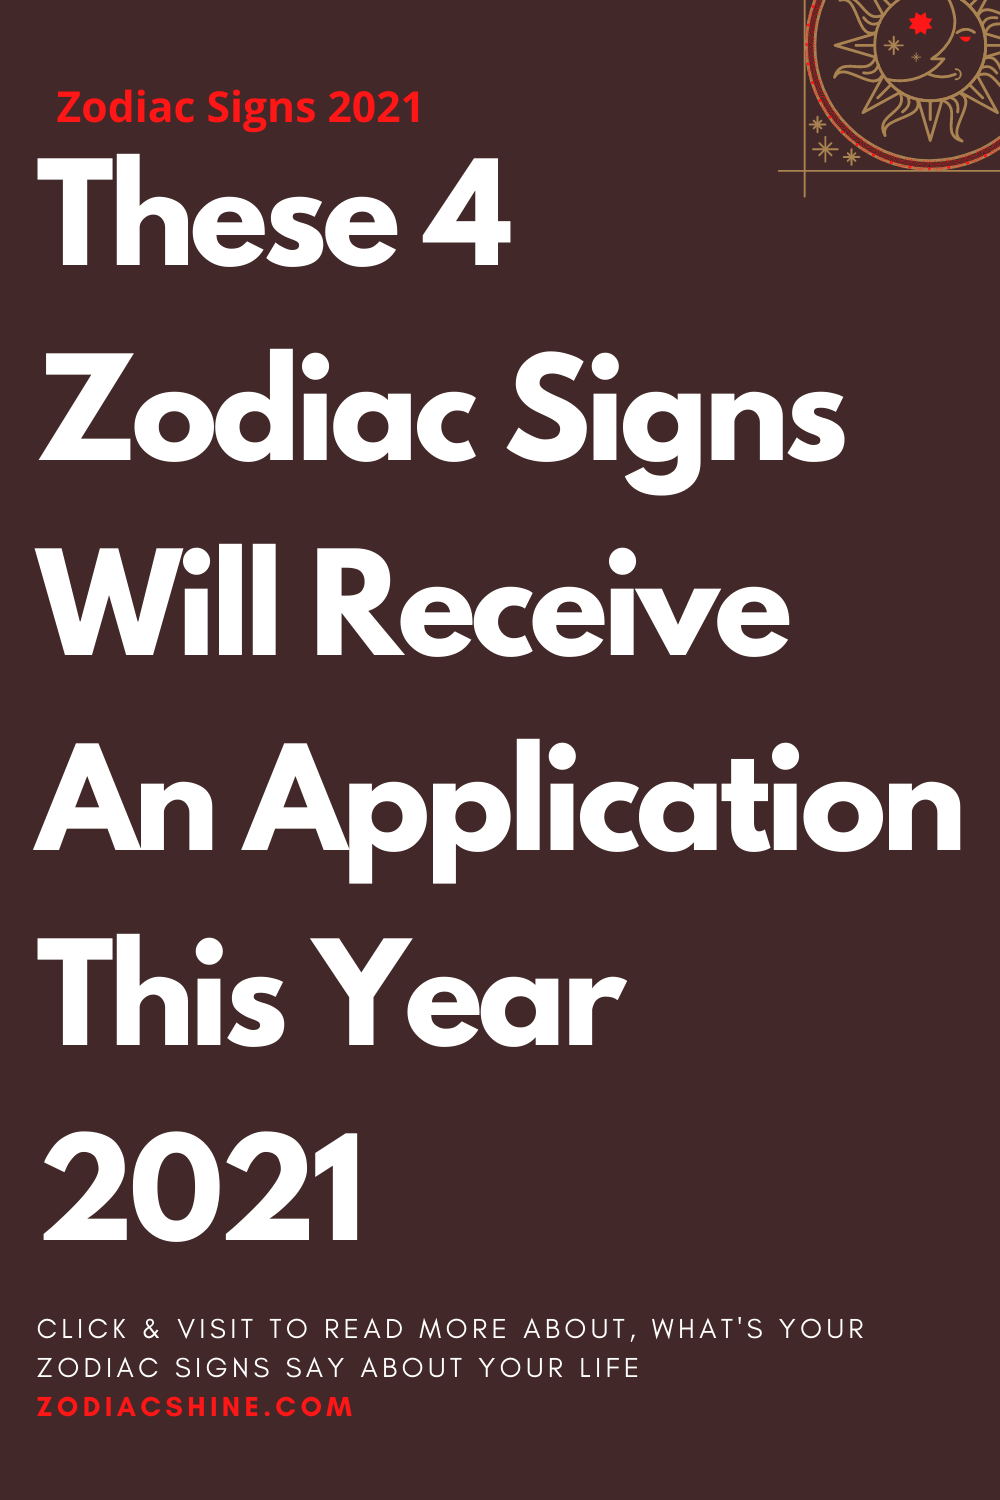 These 4 Zodiac Signs Will Receive An Application This Year 2021